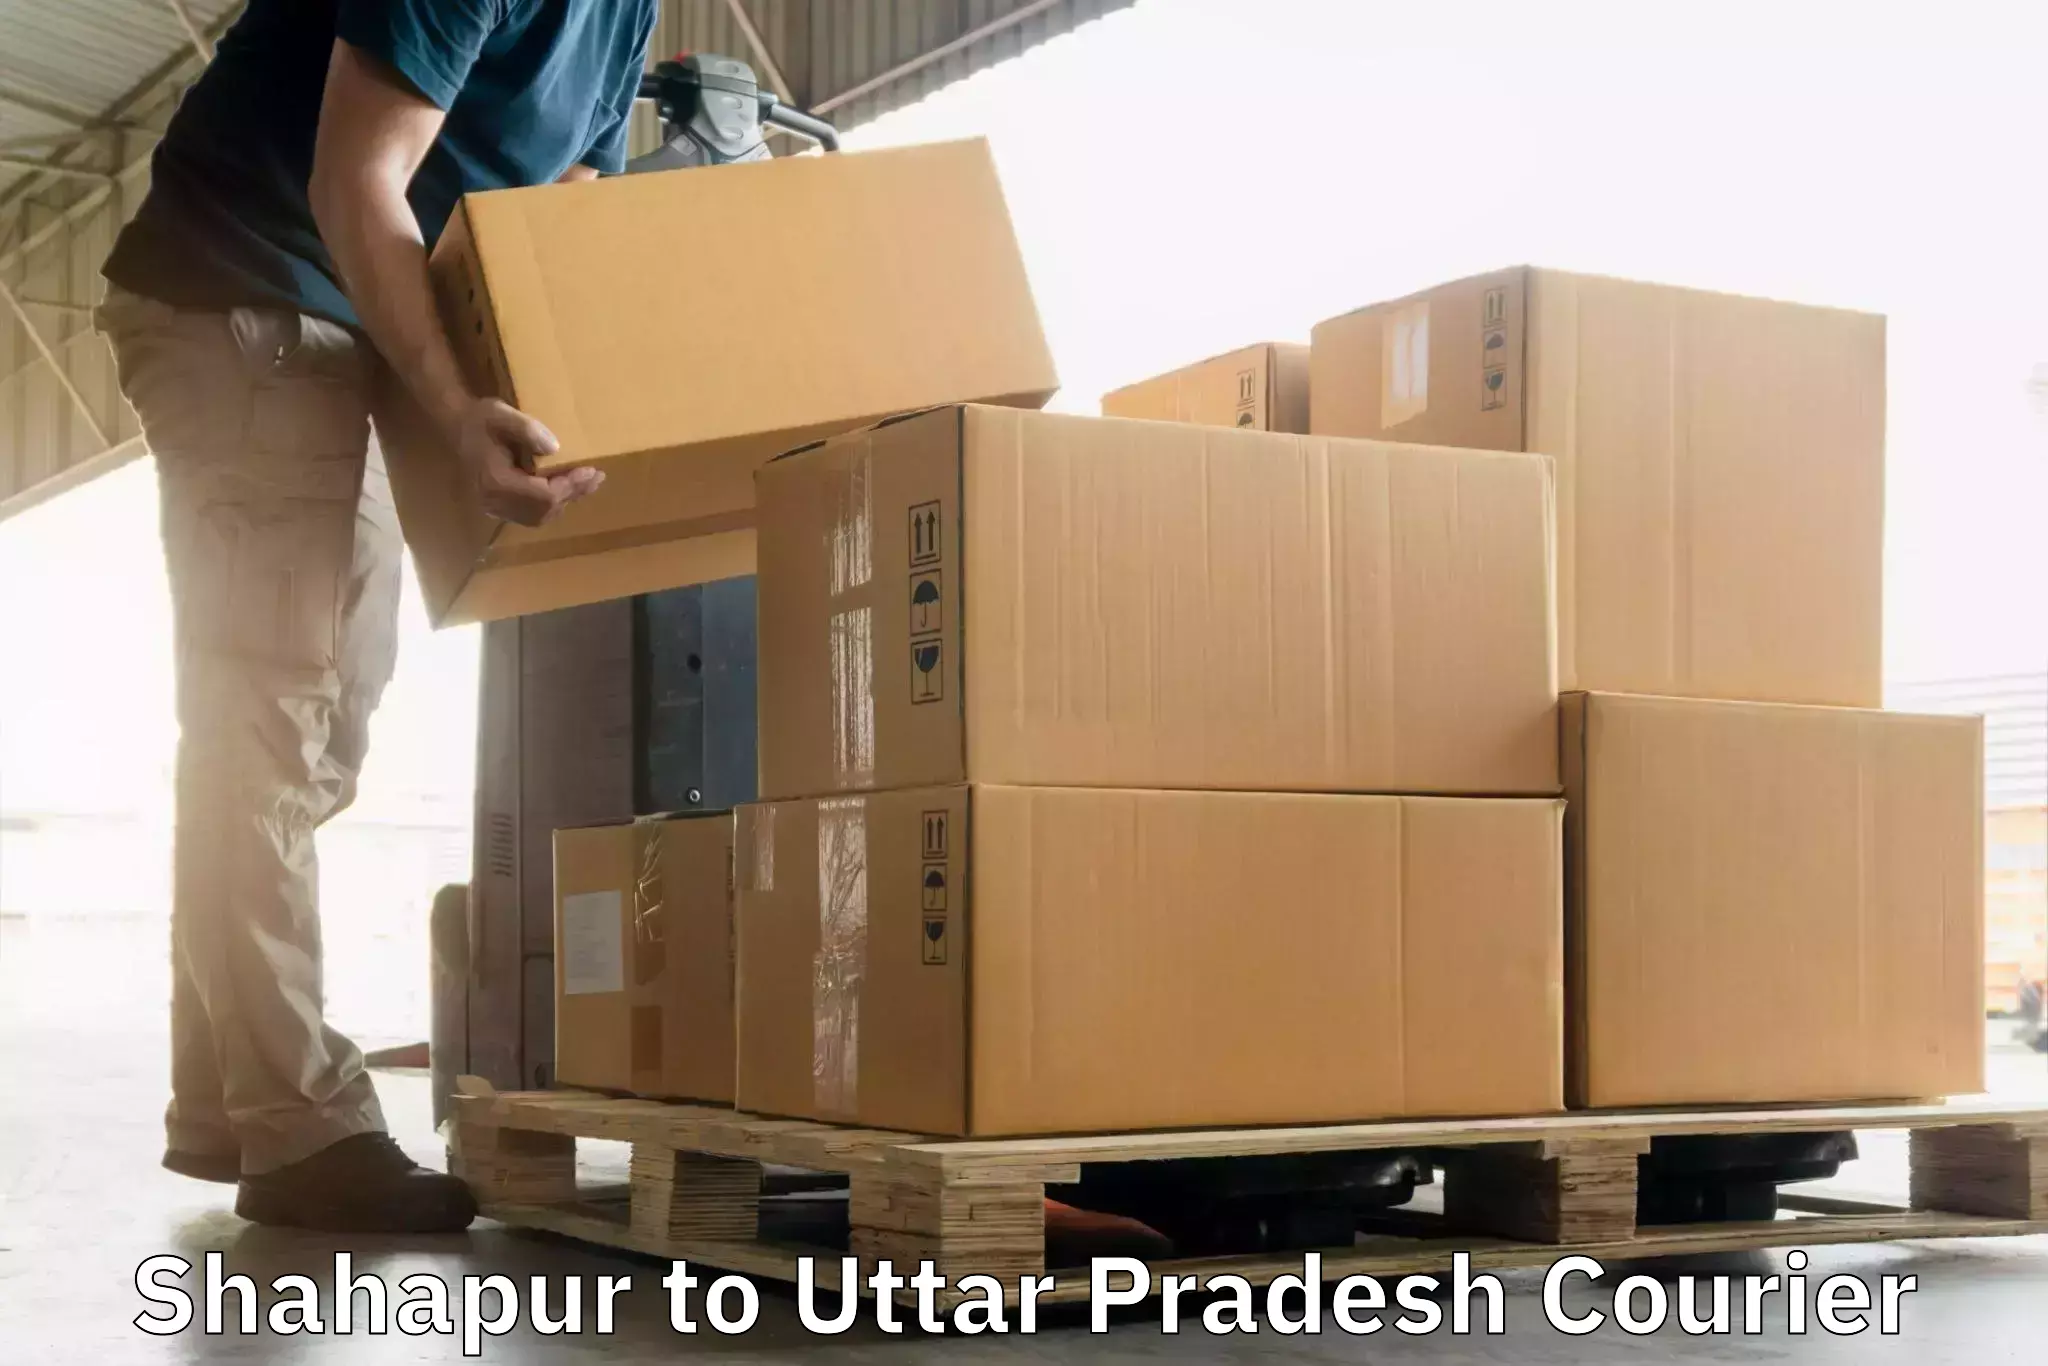 Modern delivery methods in Shahapur to Sitapur